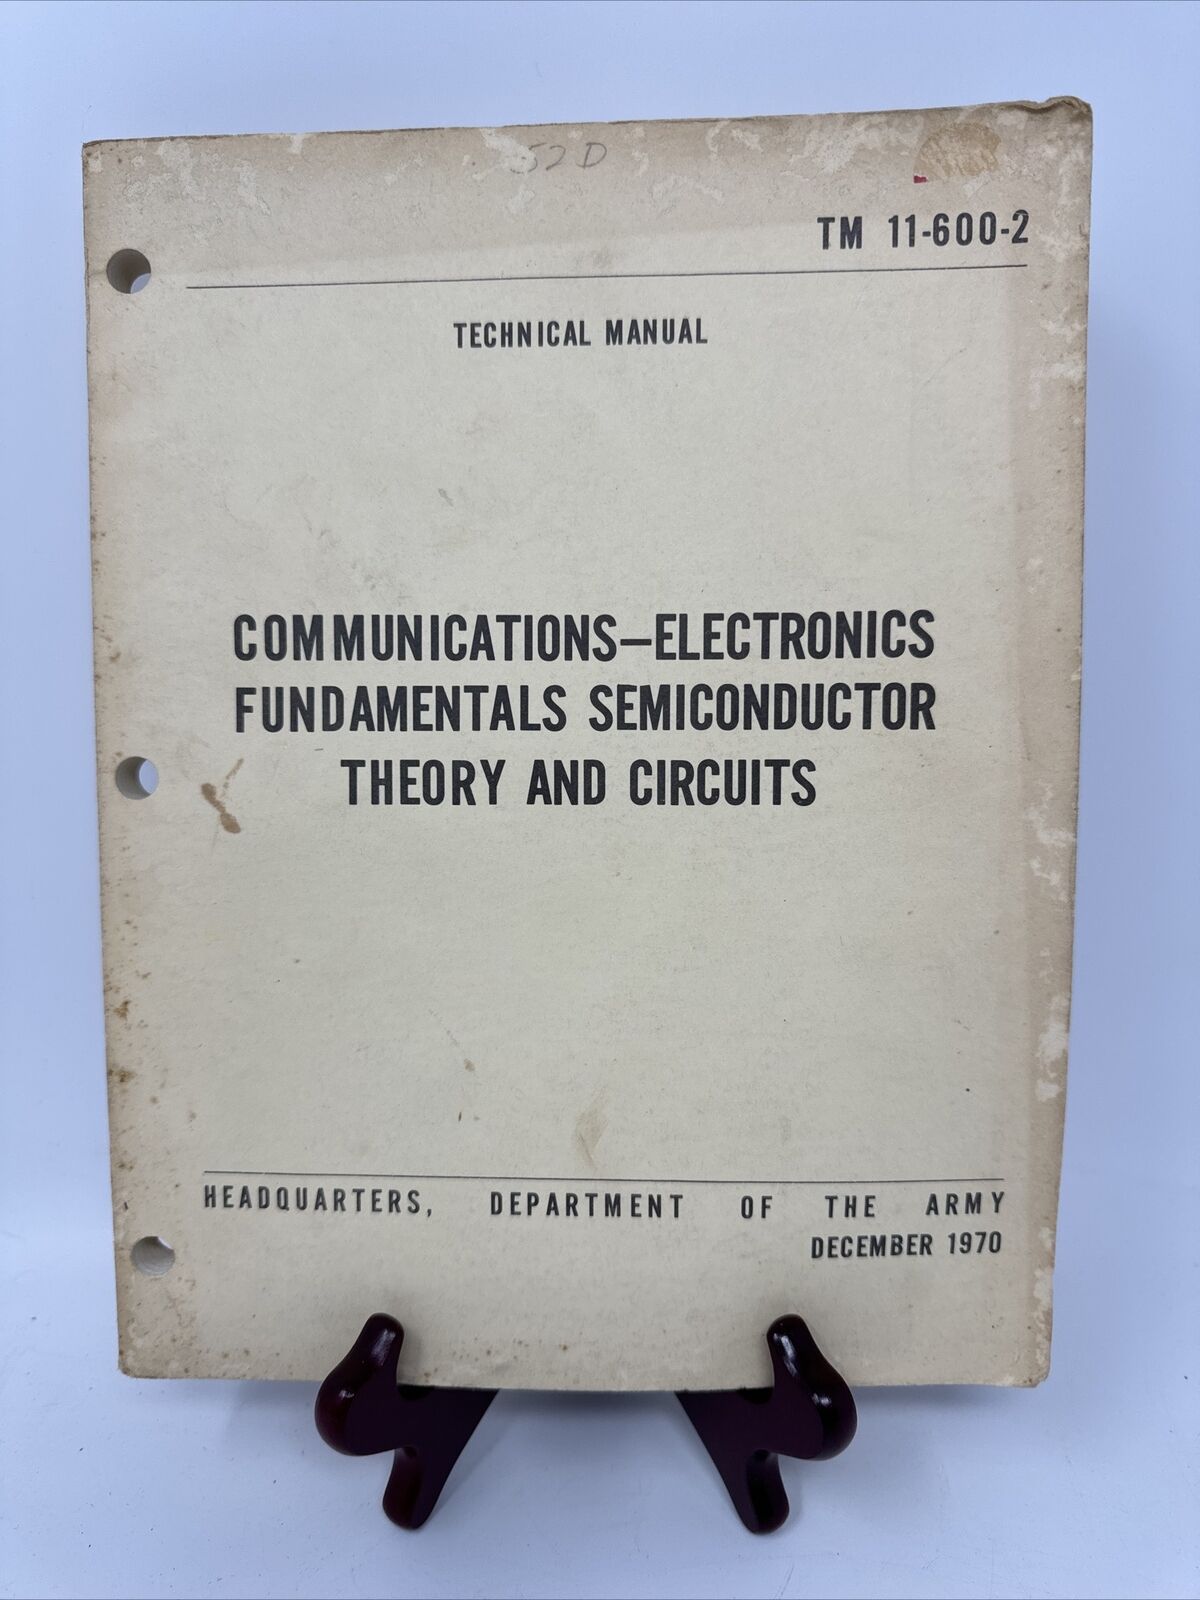 Vintage 1970 Department of the Army Communications Semiconductors TM 11-600-2